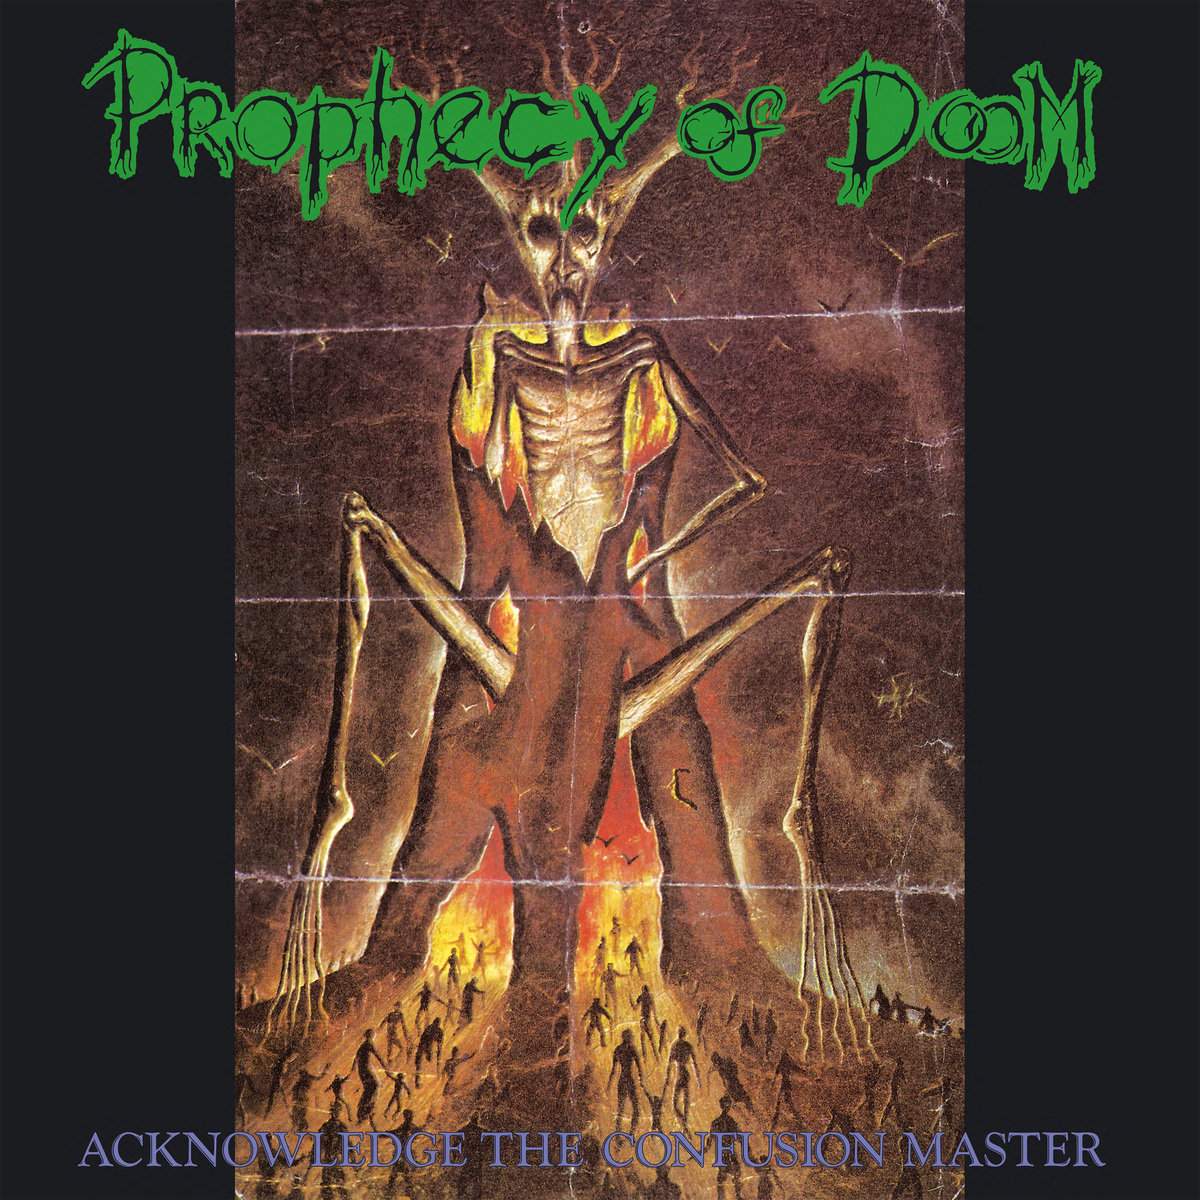 PROPHECY OF DOOM / Acknowledge the Confusion Master (2022 reissue)